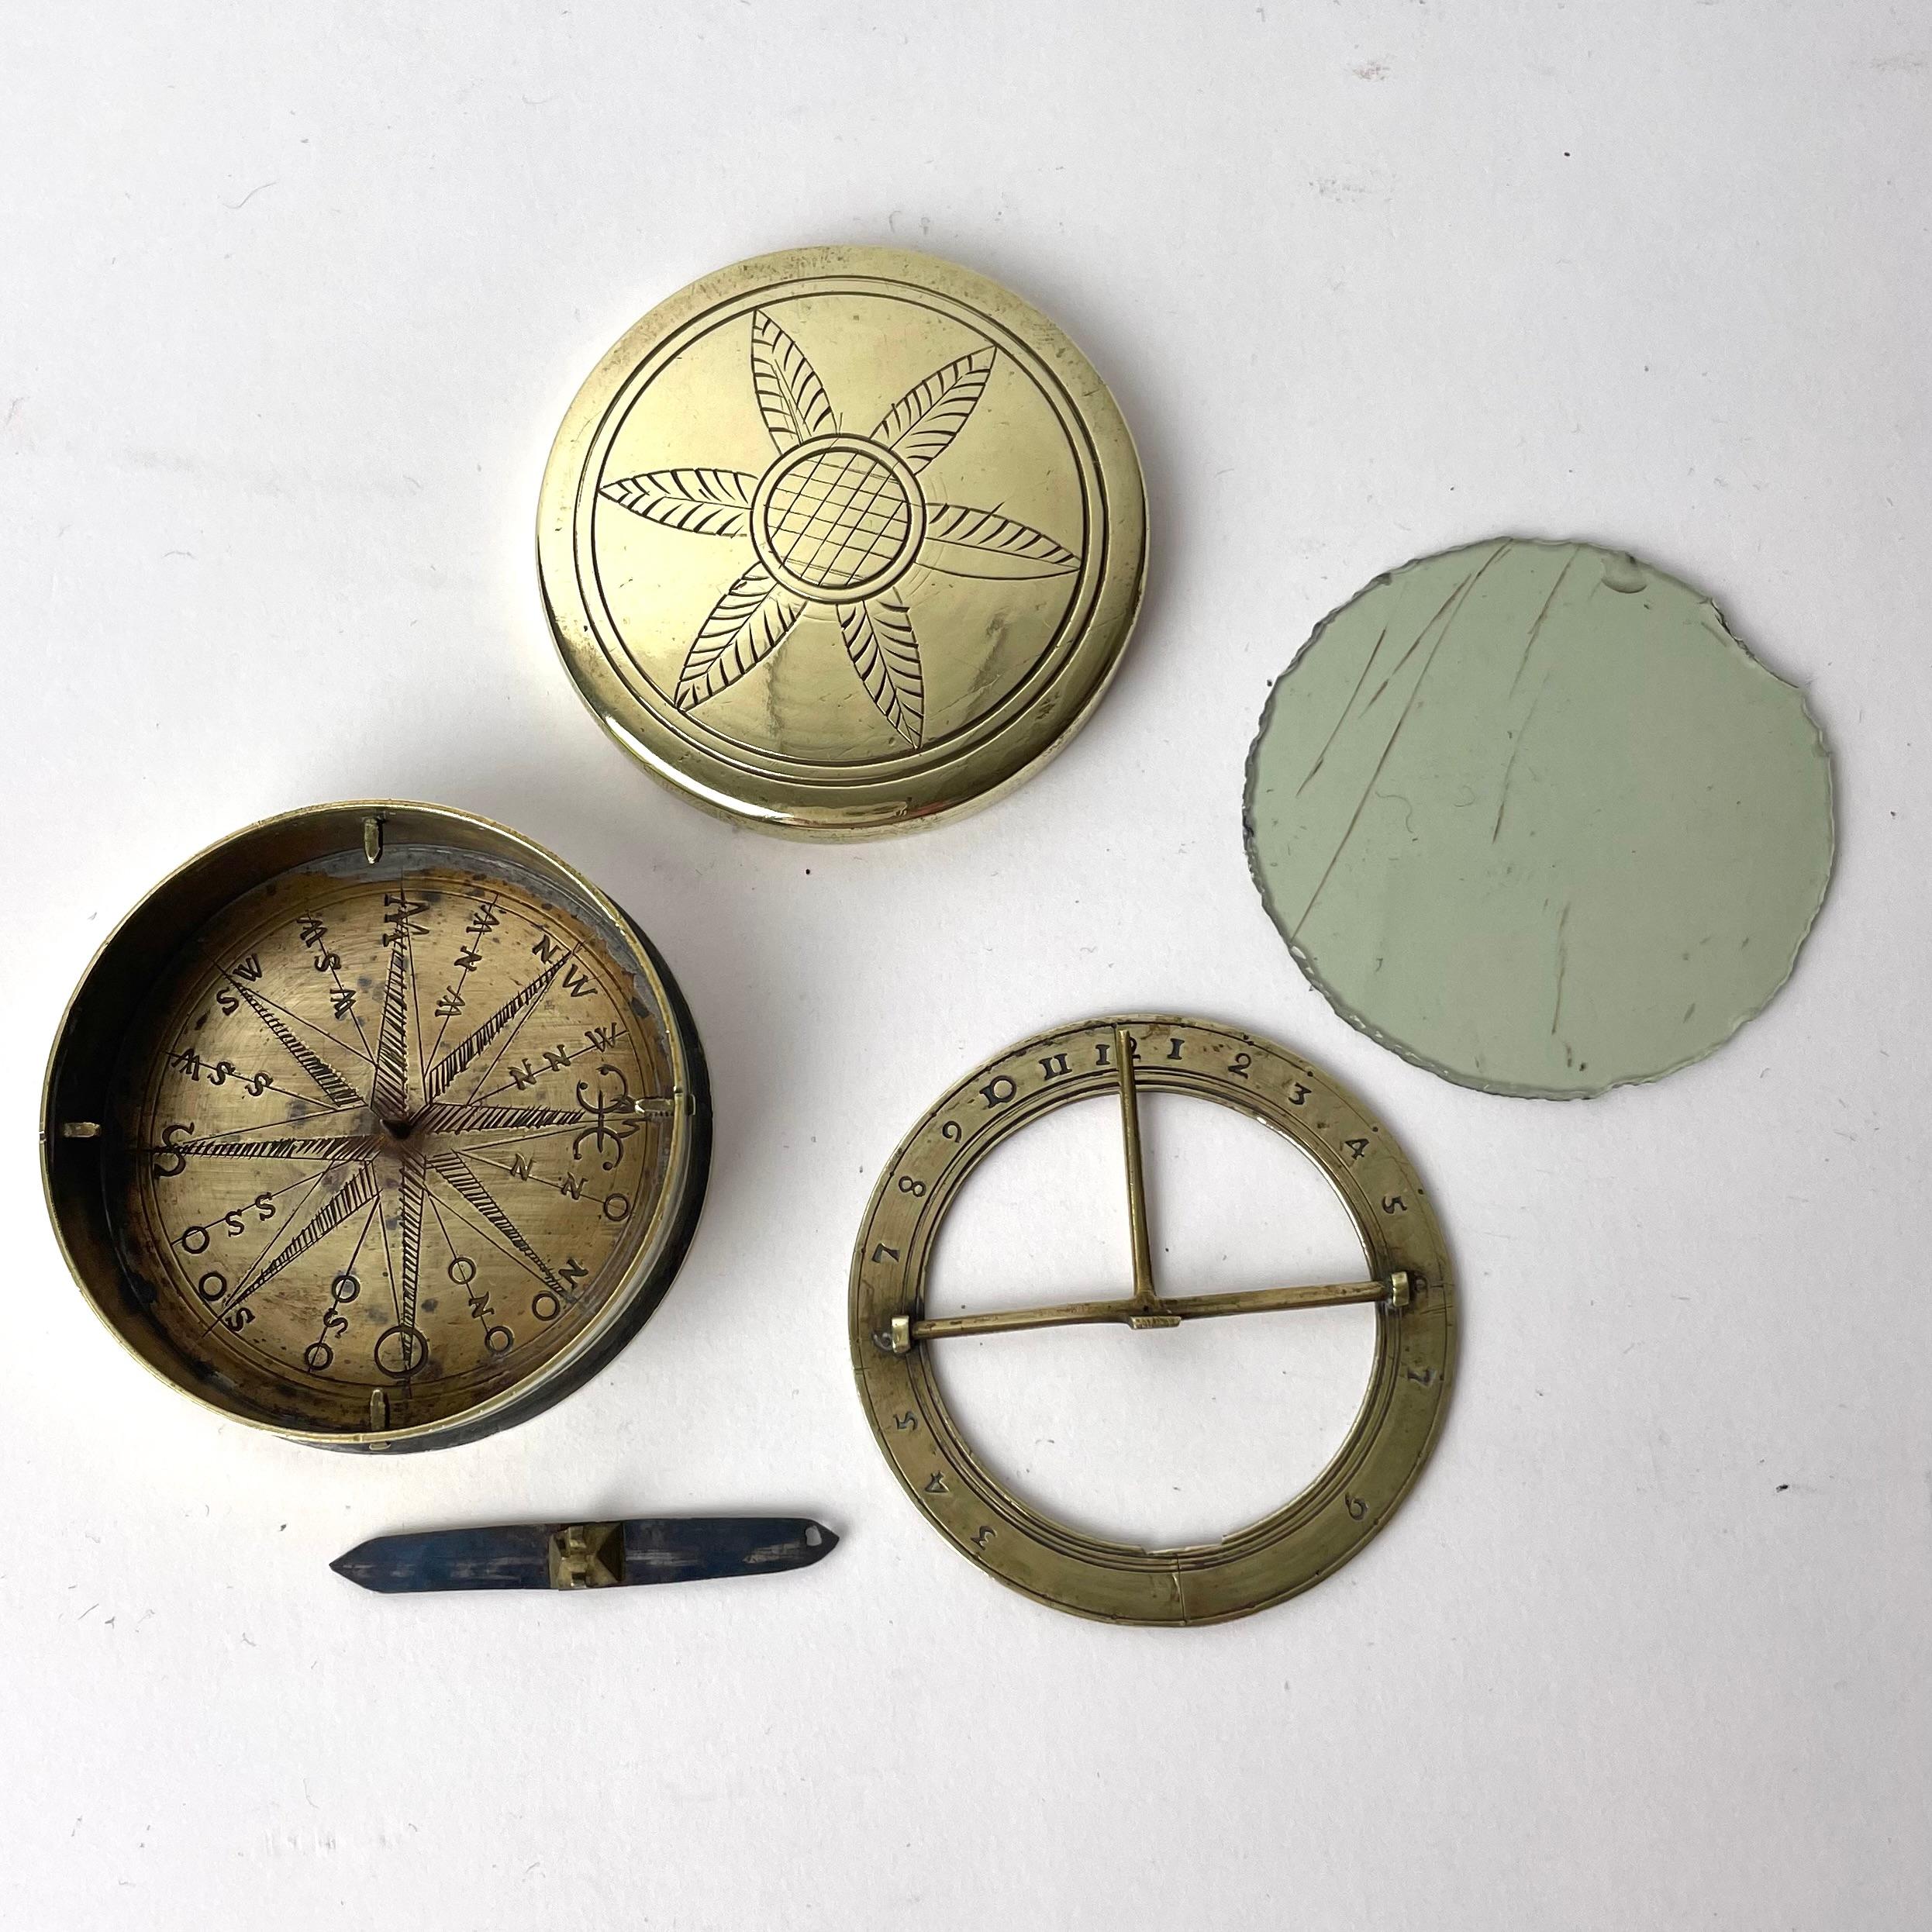 Swedish Gustavian Compass with Sundial in Brass, Late 18th/Early 19th Century Sweden